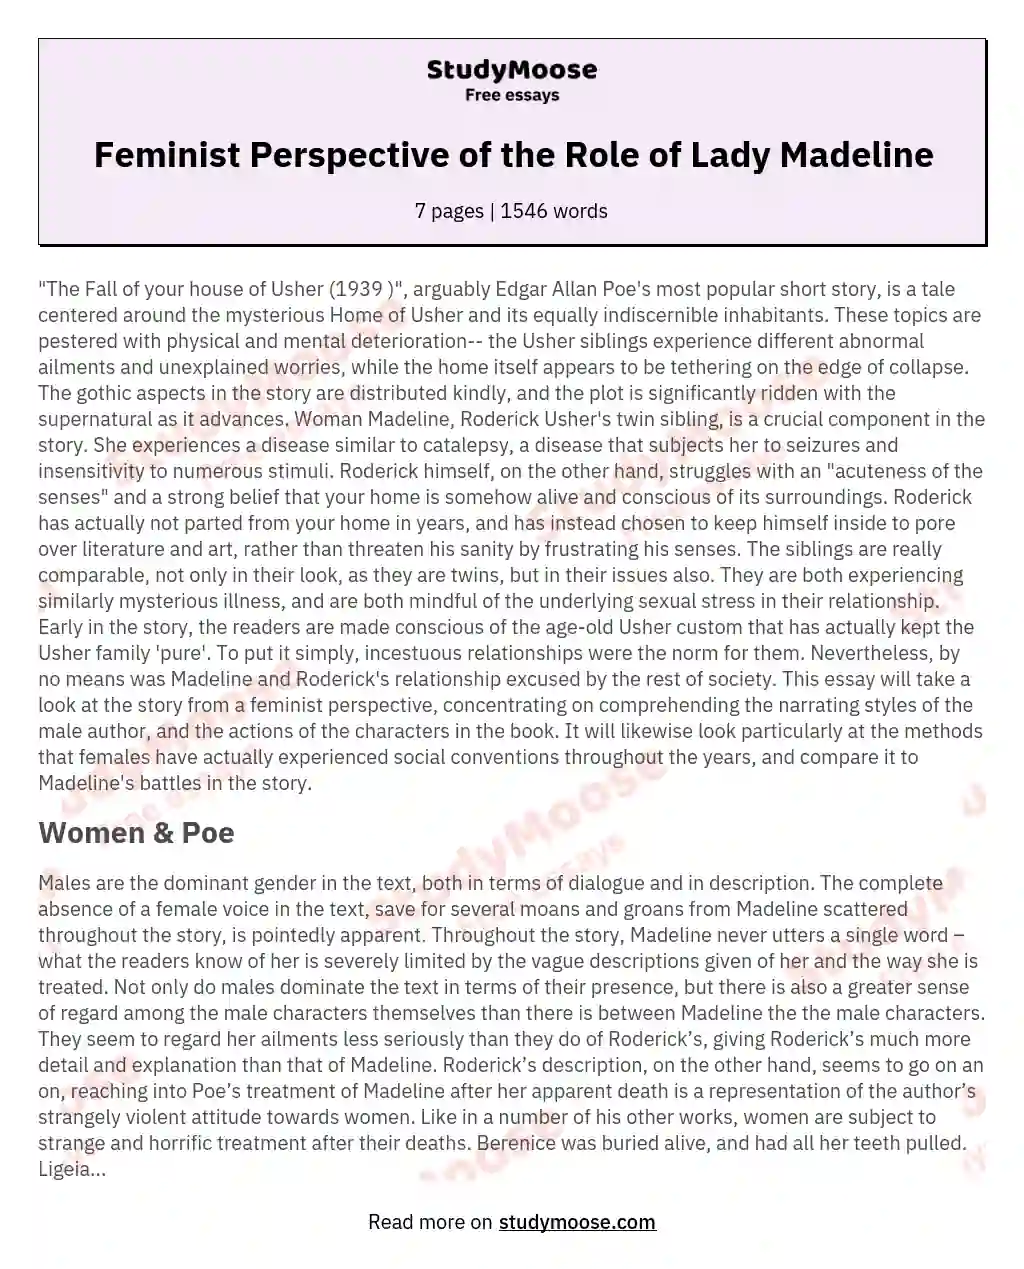 Feminist Perspective of the Role of Lady Madeline